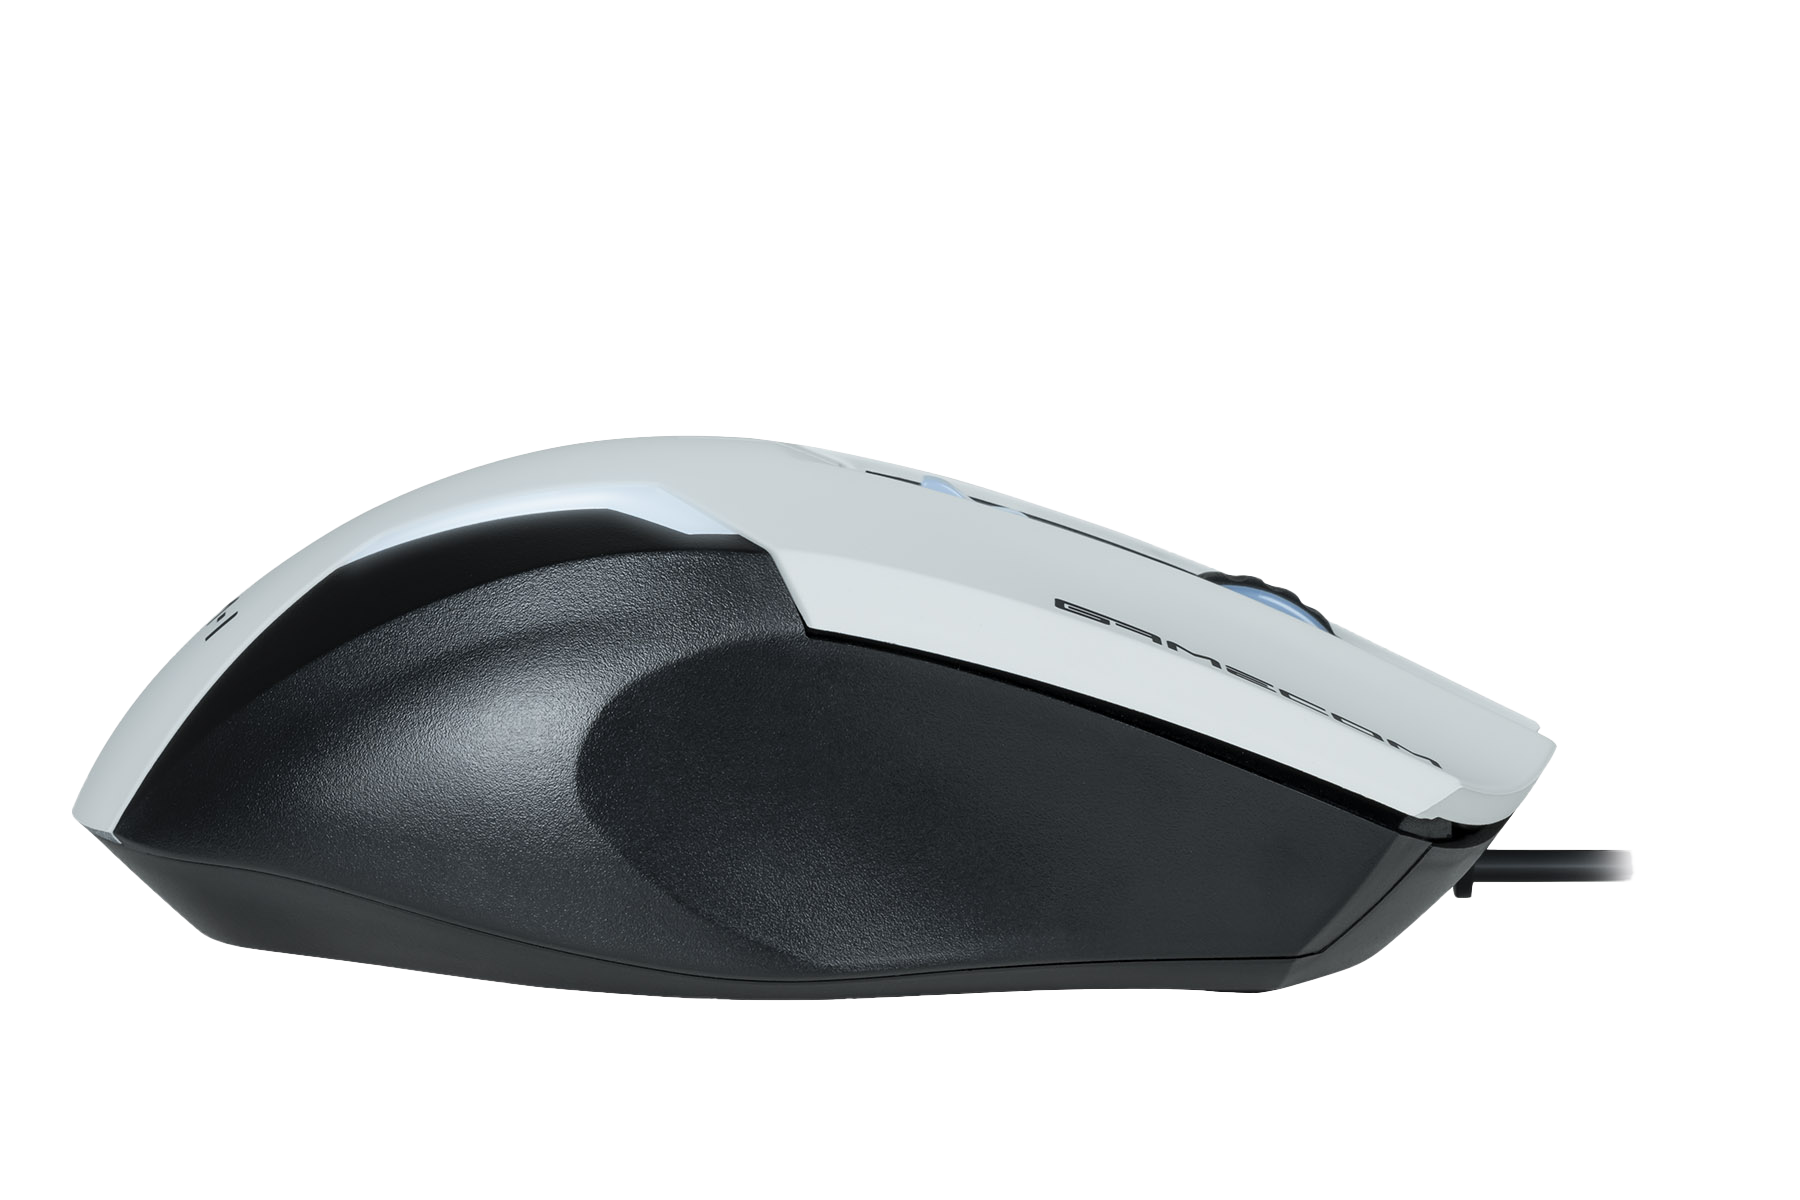 GM-1 GAMING MOUSE